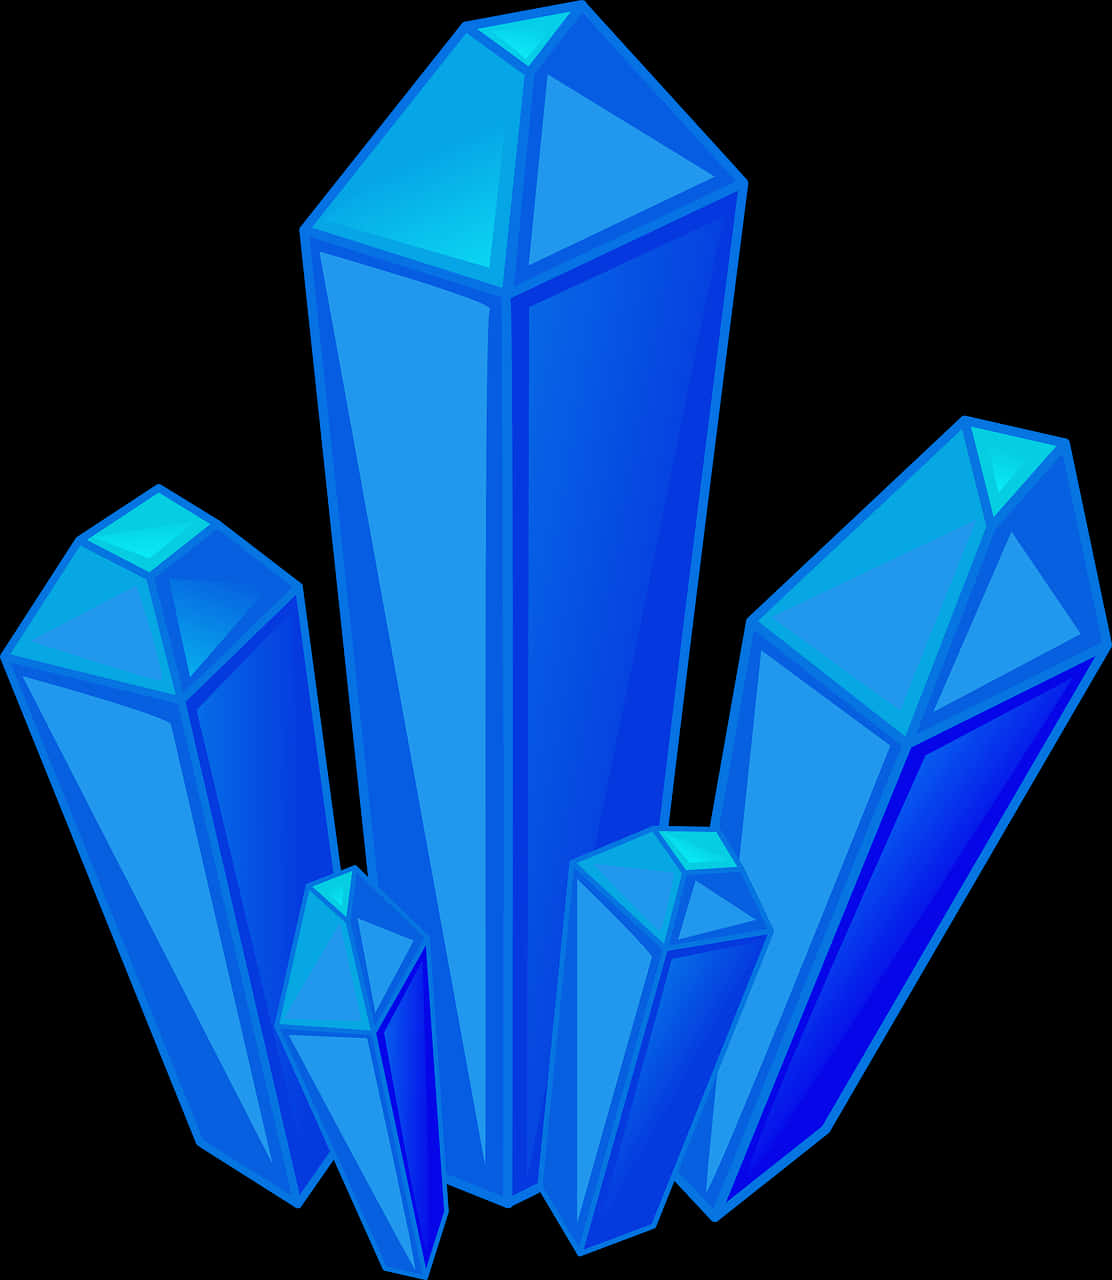 A Group Of Blue Crystals